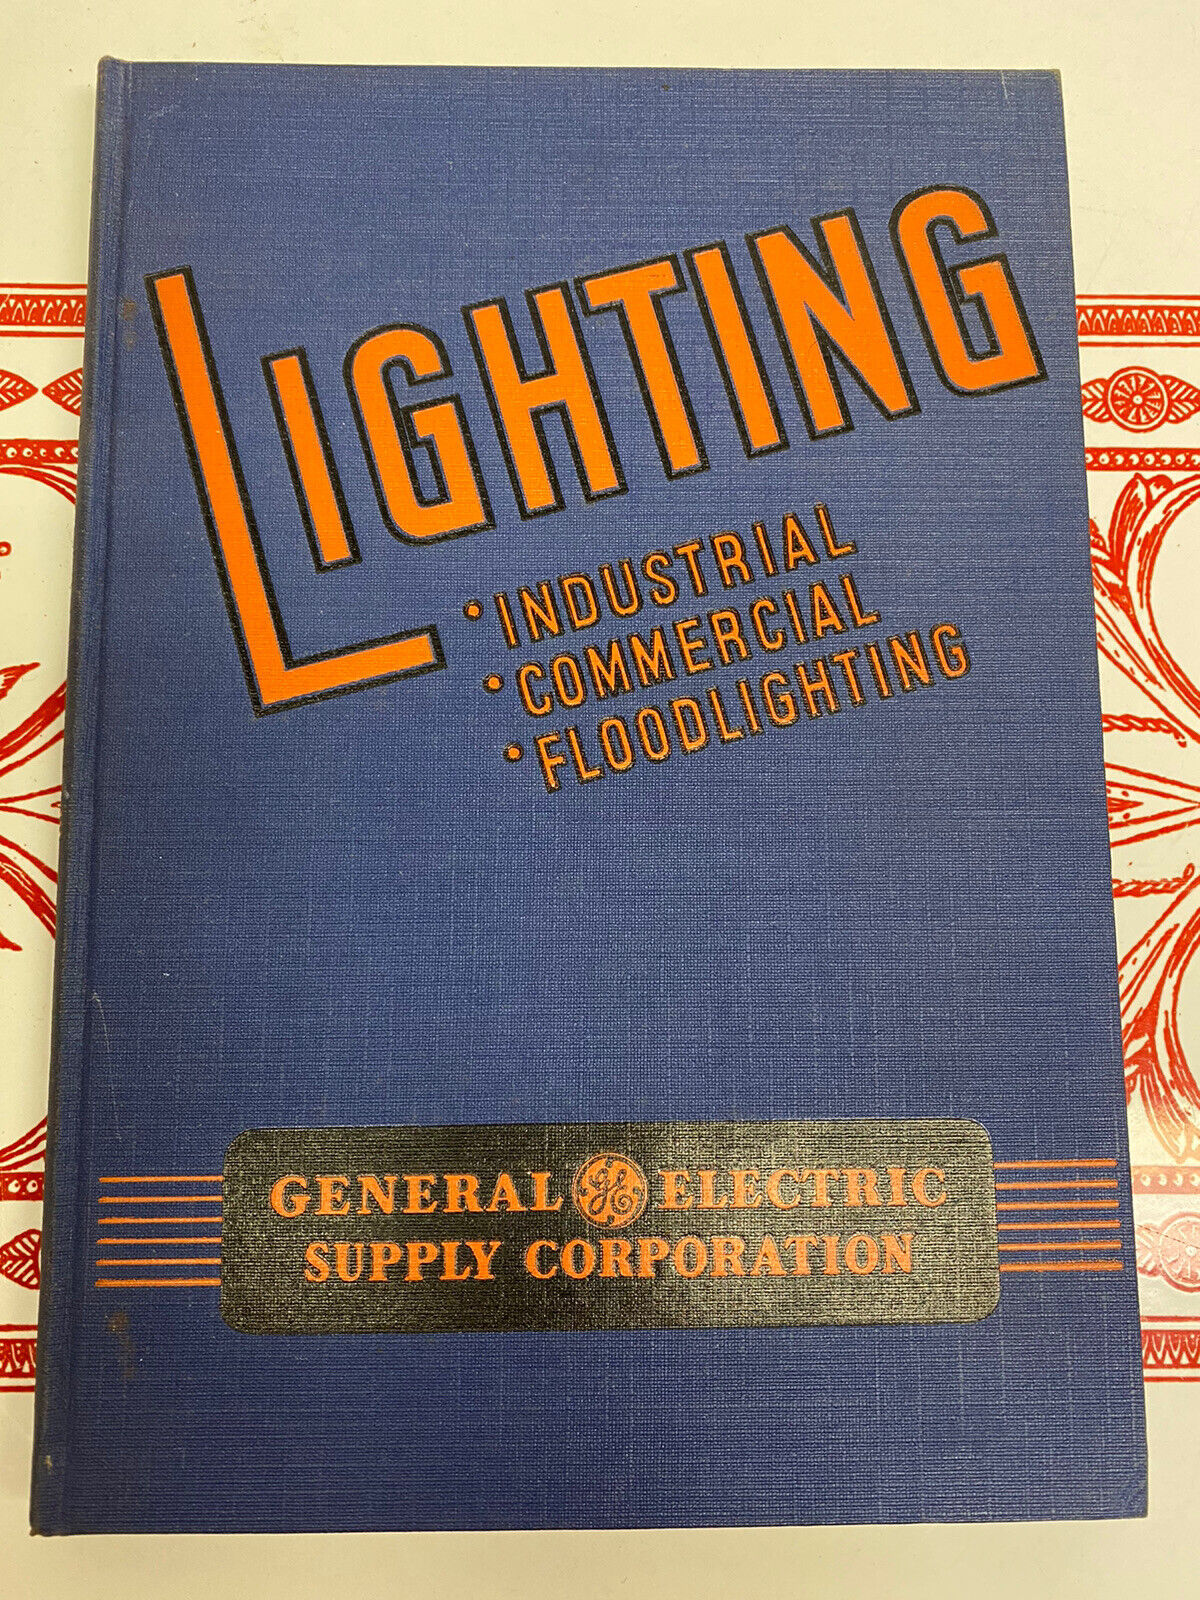 Vintage 1941 General Electric Supply Corporation Lighting Industrial Commercial 